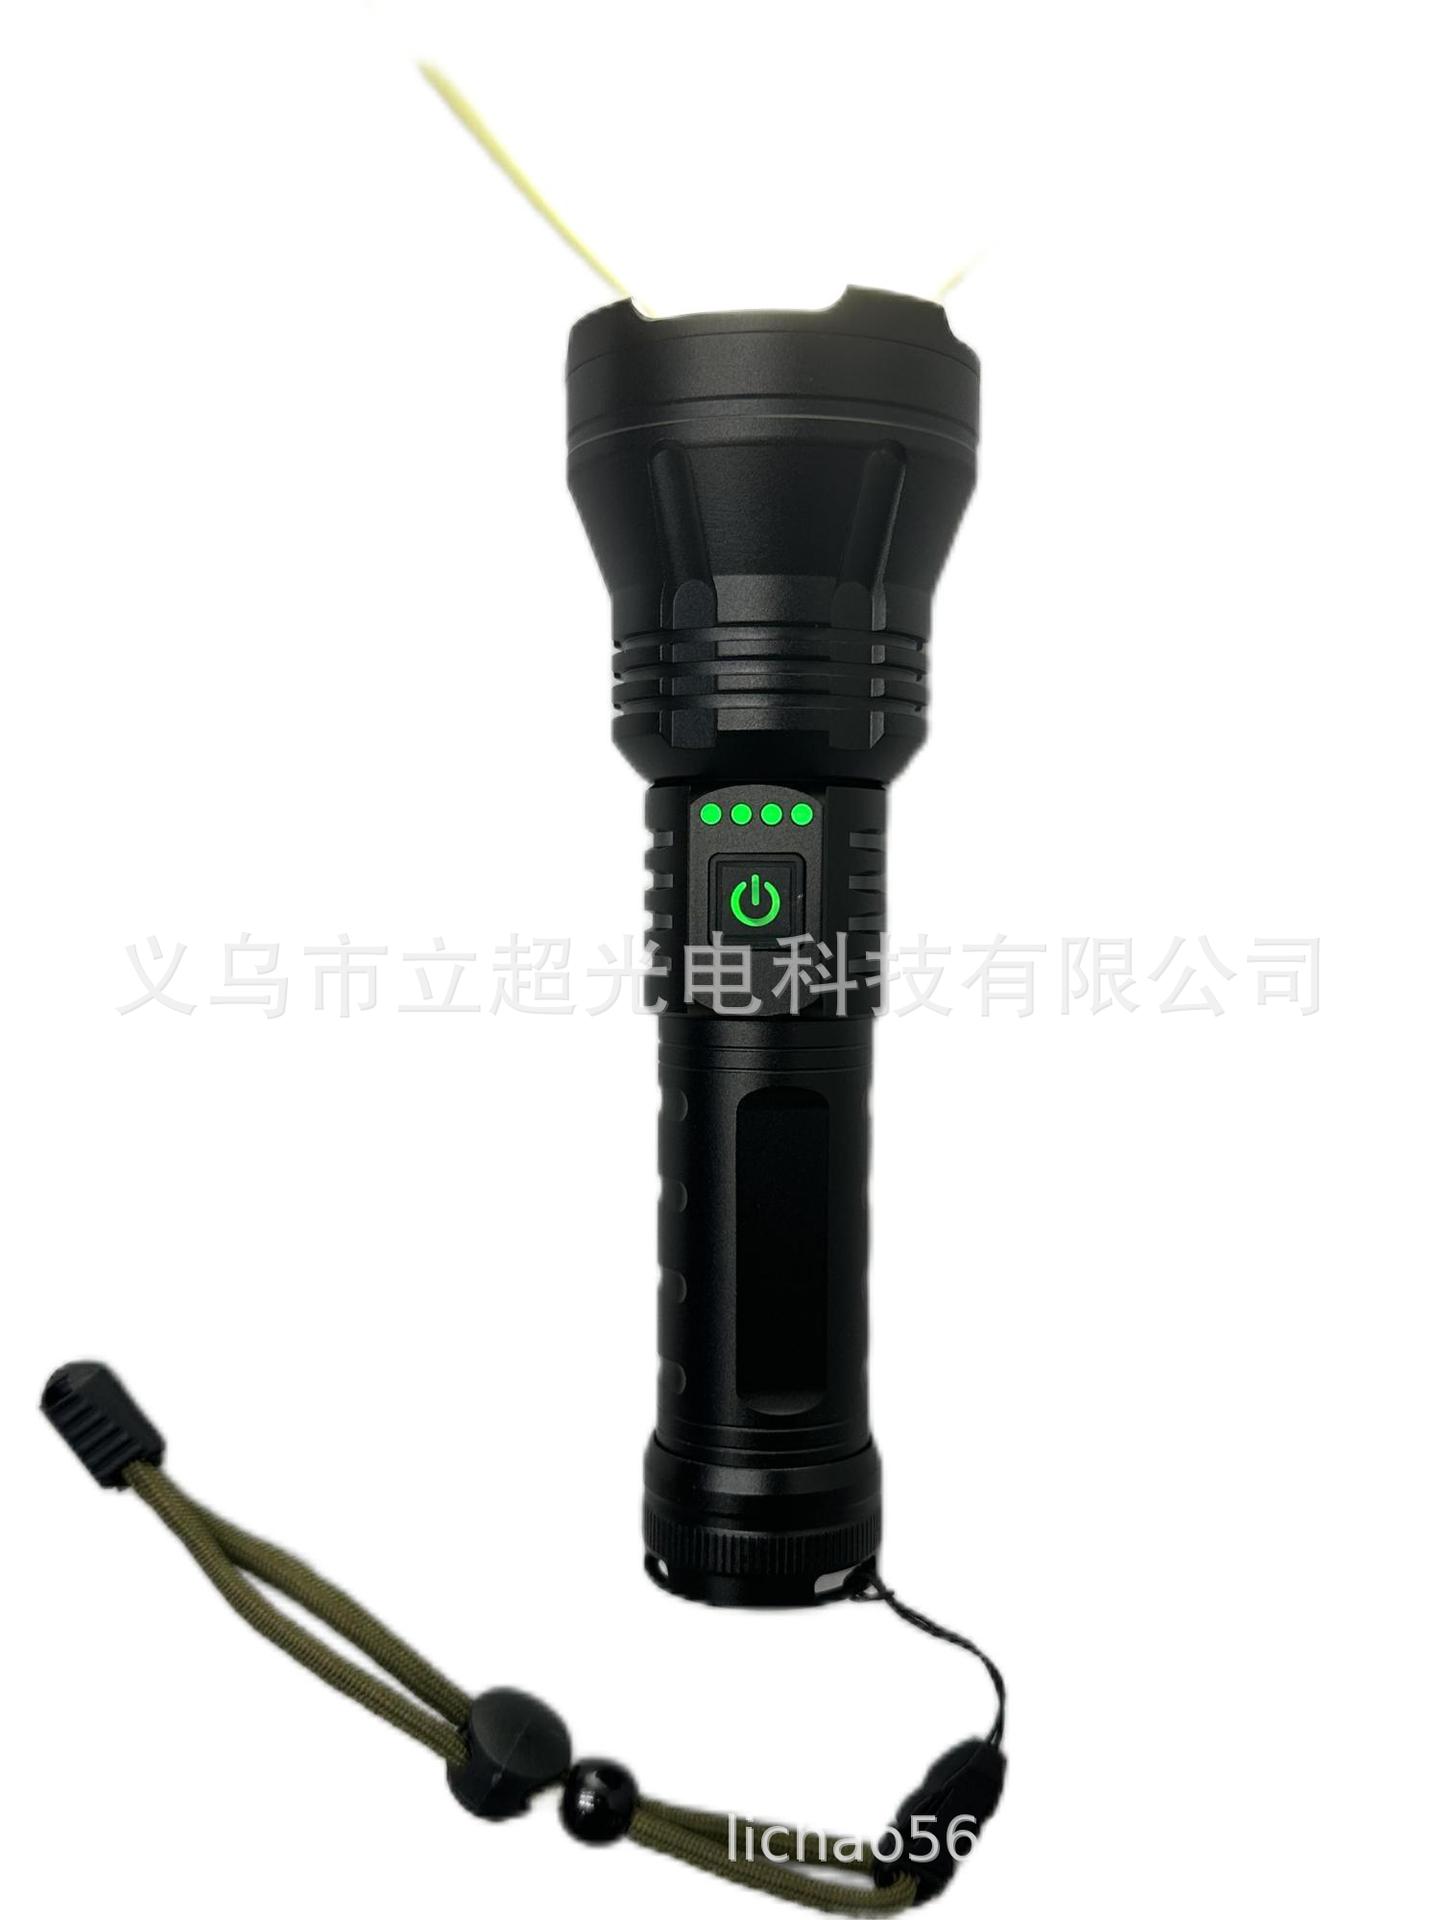 New Portable Flashlight Vertical Super LED Power Torch Outdoor Camping Multifunctional Waterproof High Power